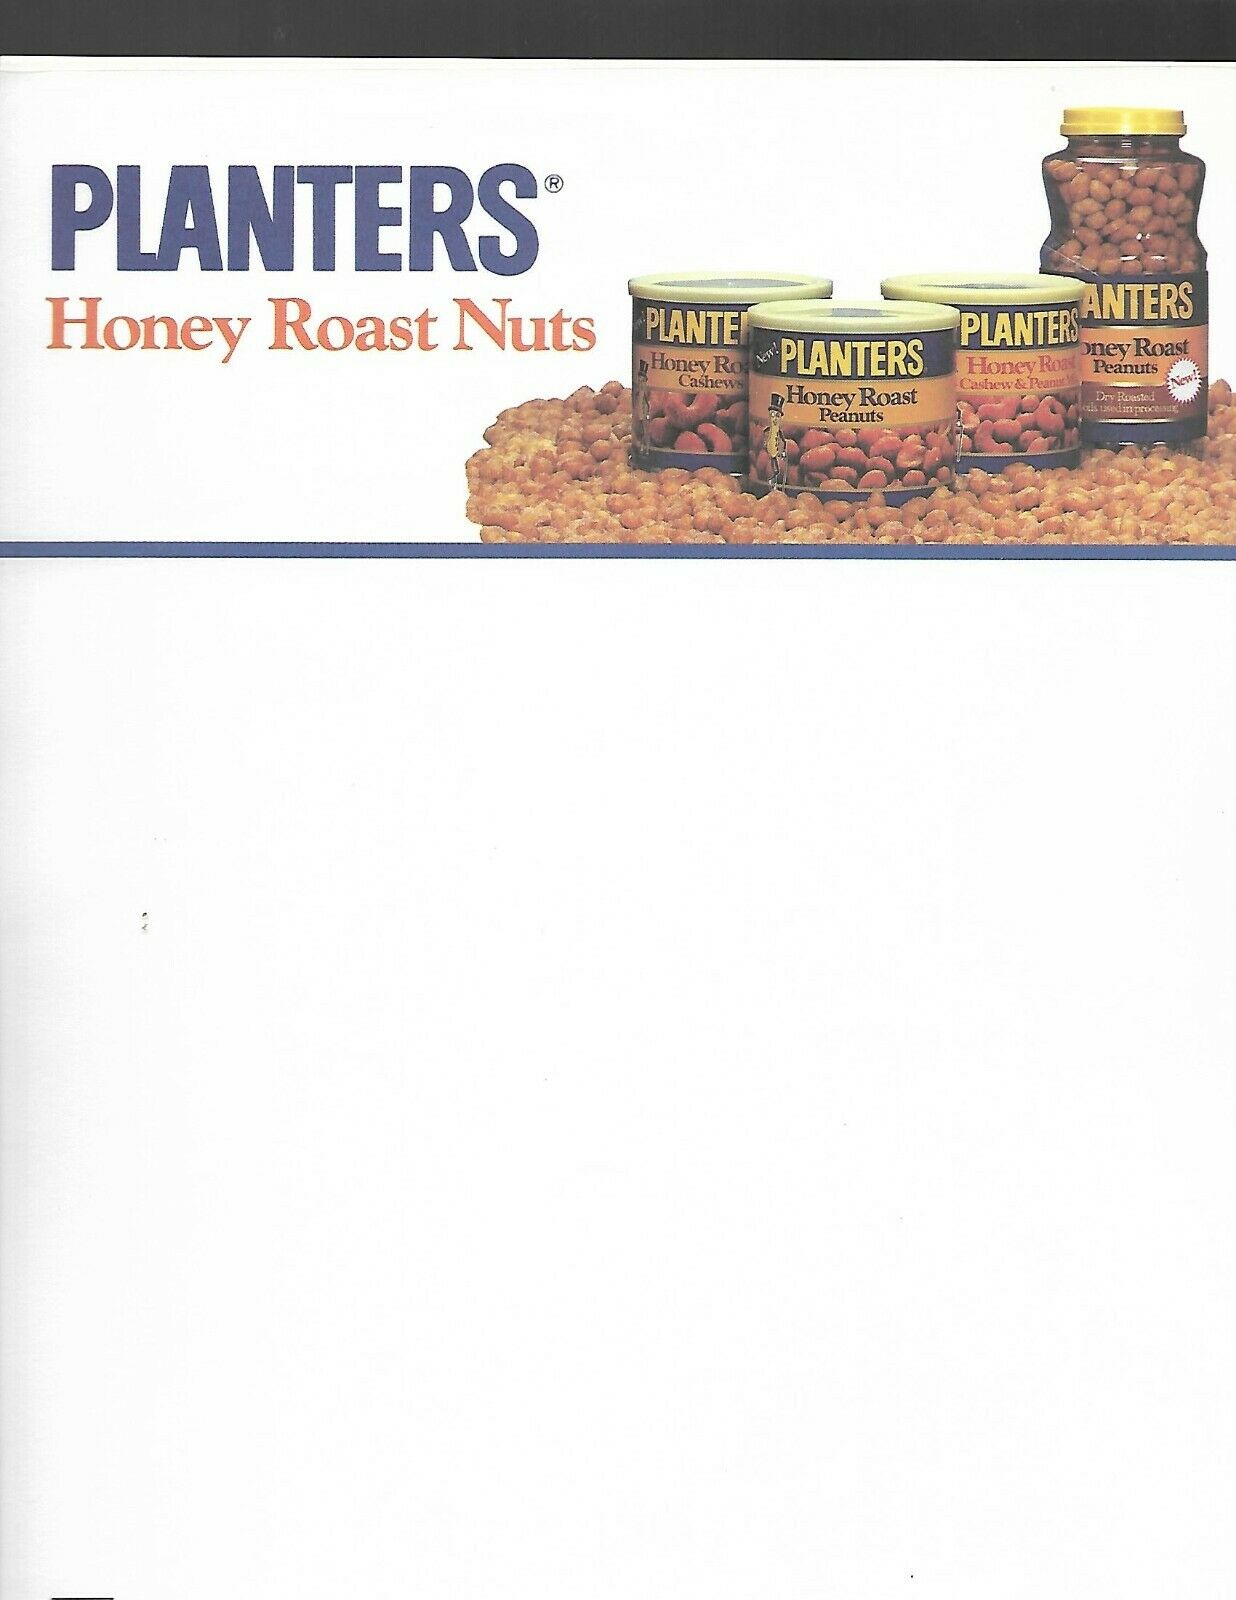 Planters Peanut Promotion Page Planters Honey Roasted Nuts Nabisco #20